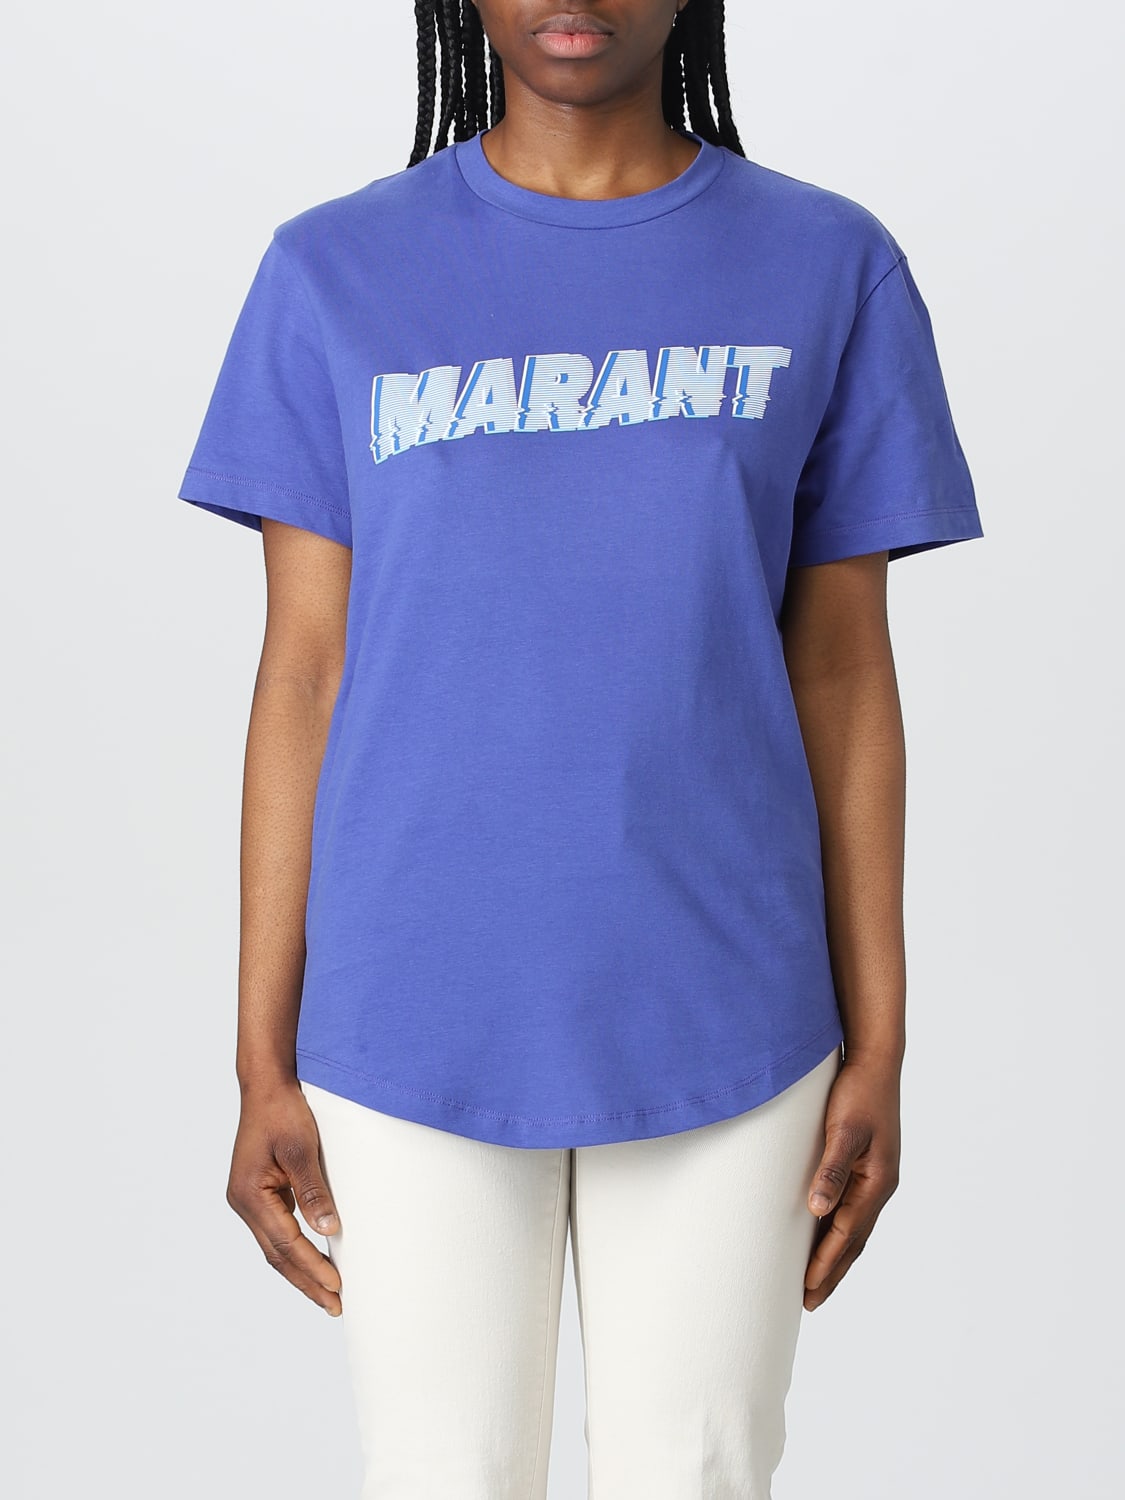 ISABEL MARANT ETOILE: for woman - Electric Blue | Marant Etoile t-shirt TS0035FAA1N91E online on GIGLIO.COM